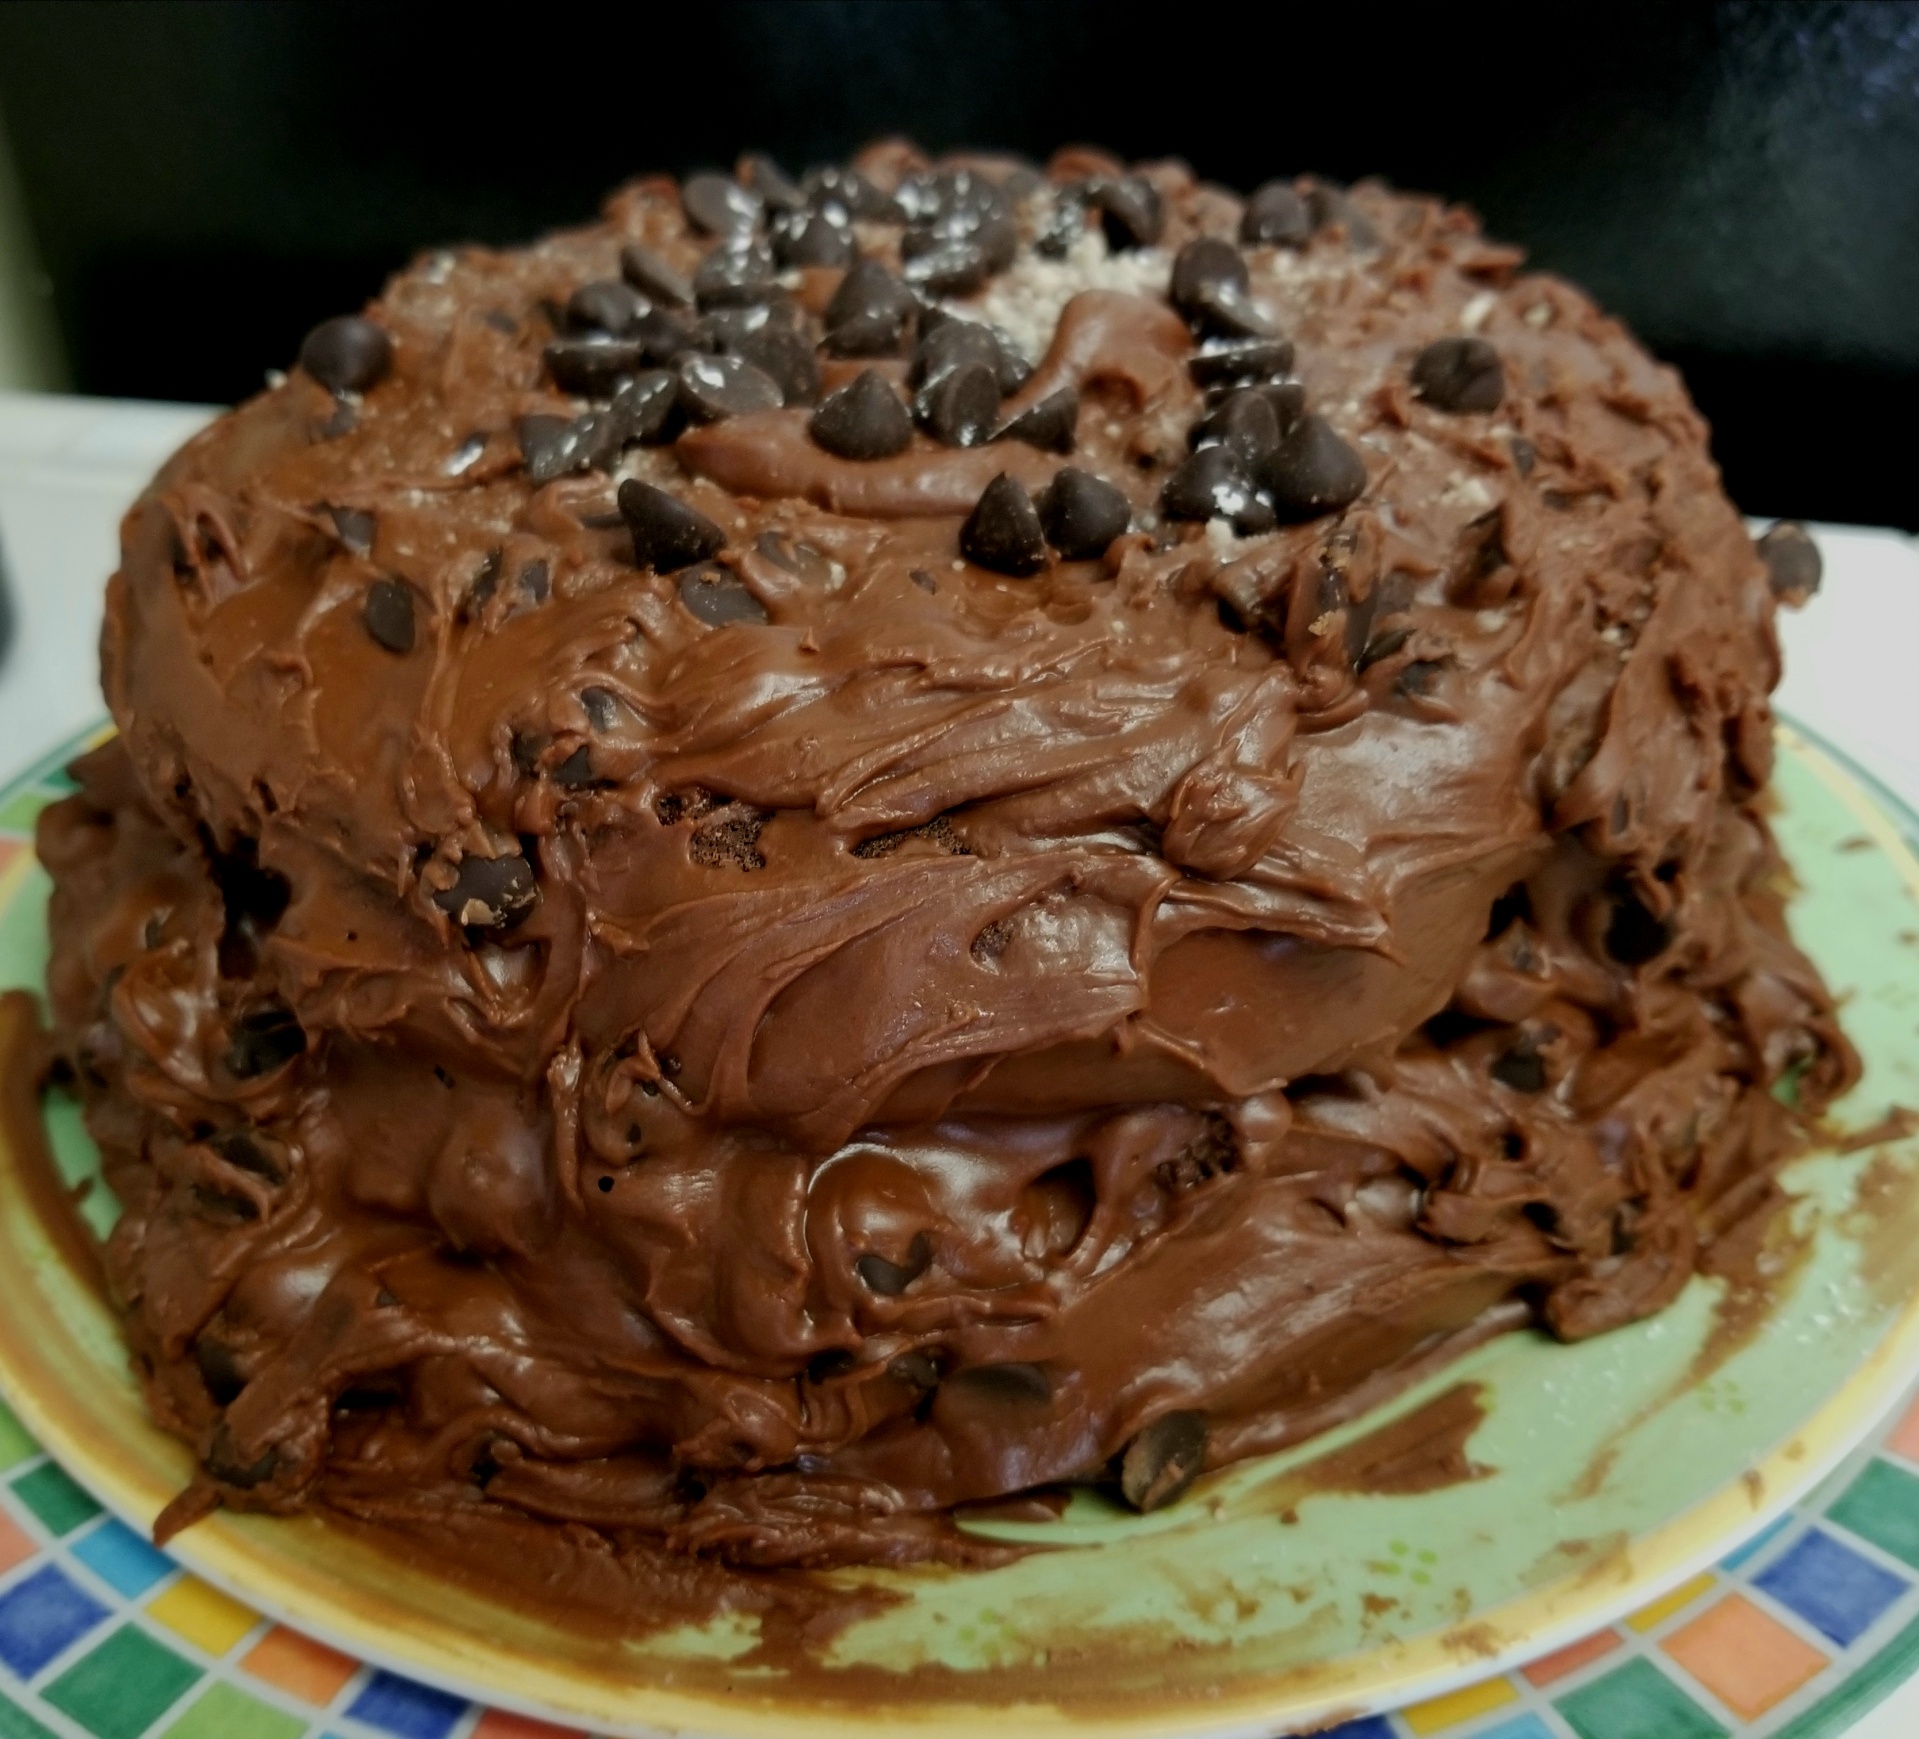 Chocolate cake made from scratch, by hand